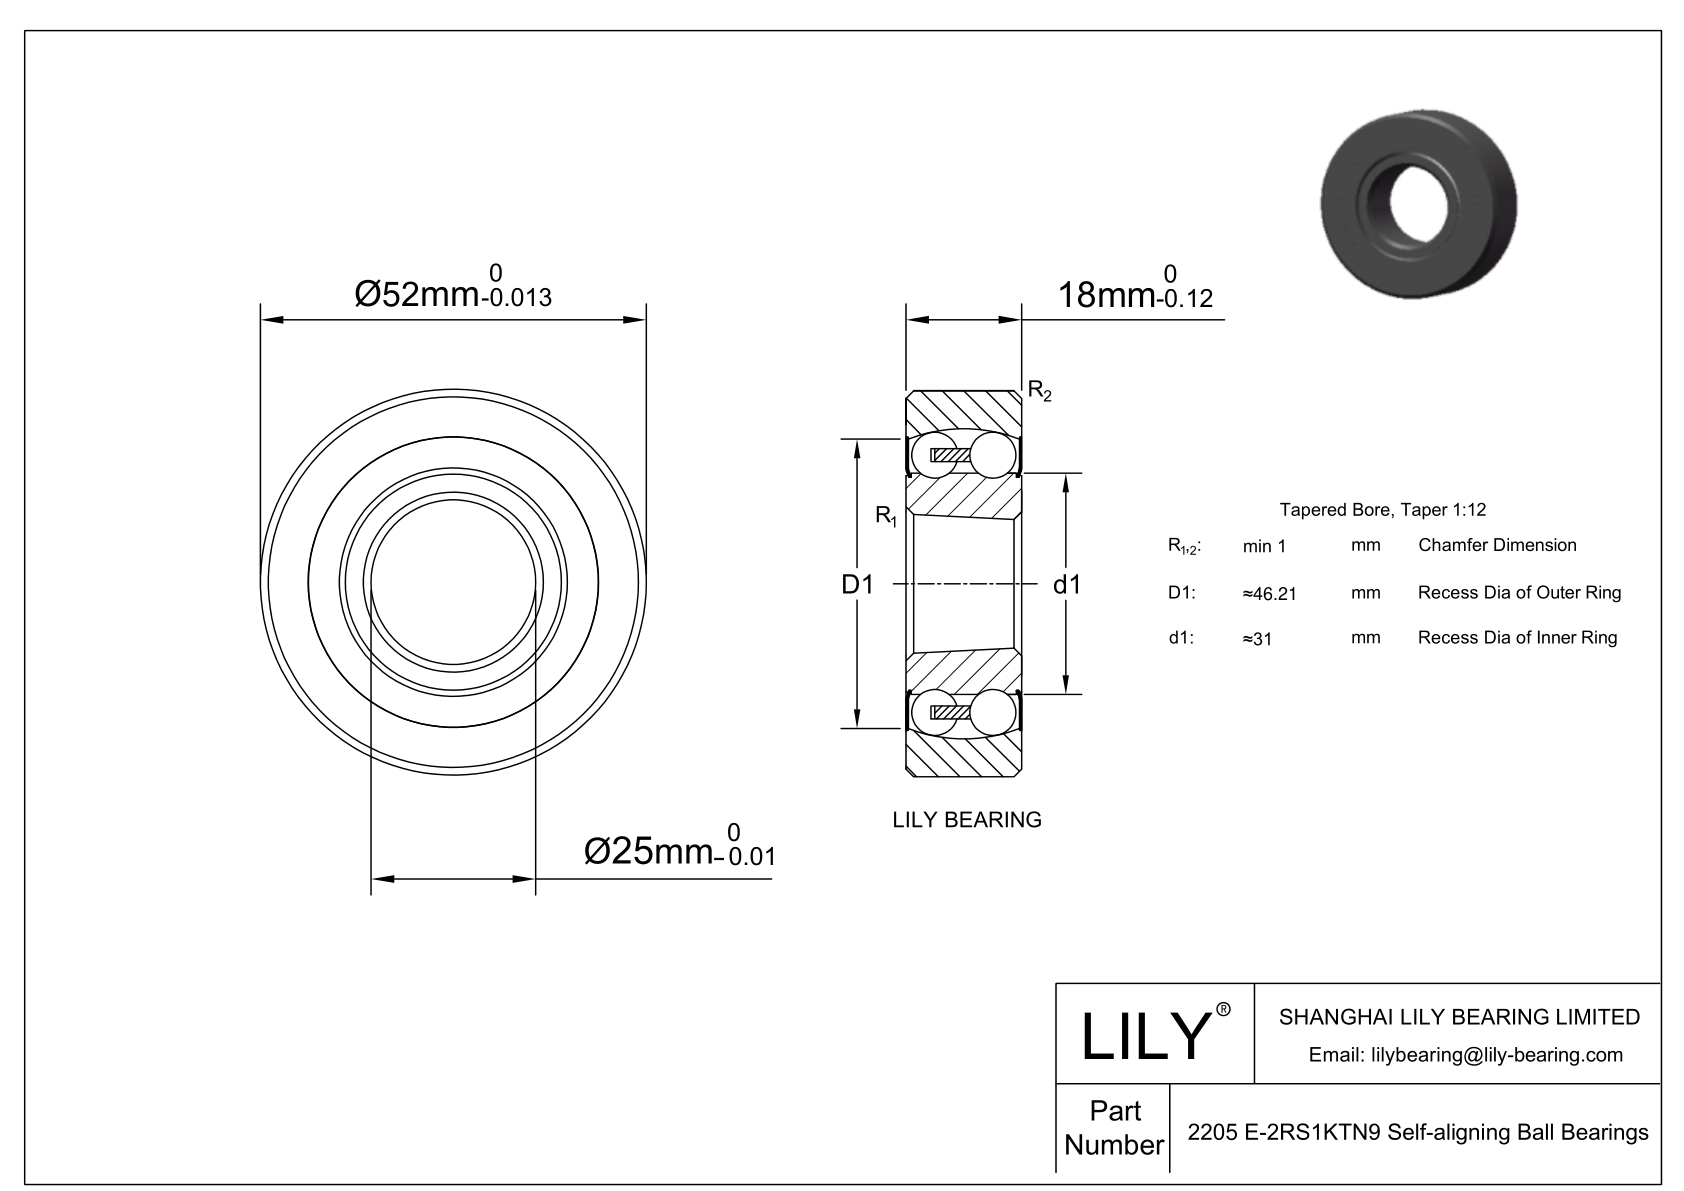 S2205 E-2RS1KTN9 Stainless Steel Self Aligning Ball Bearings cad drawing